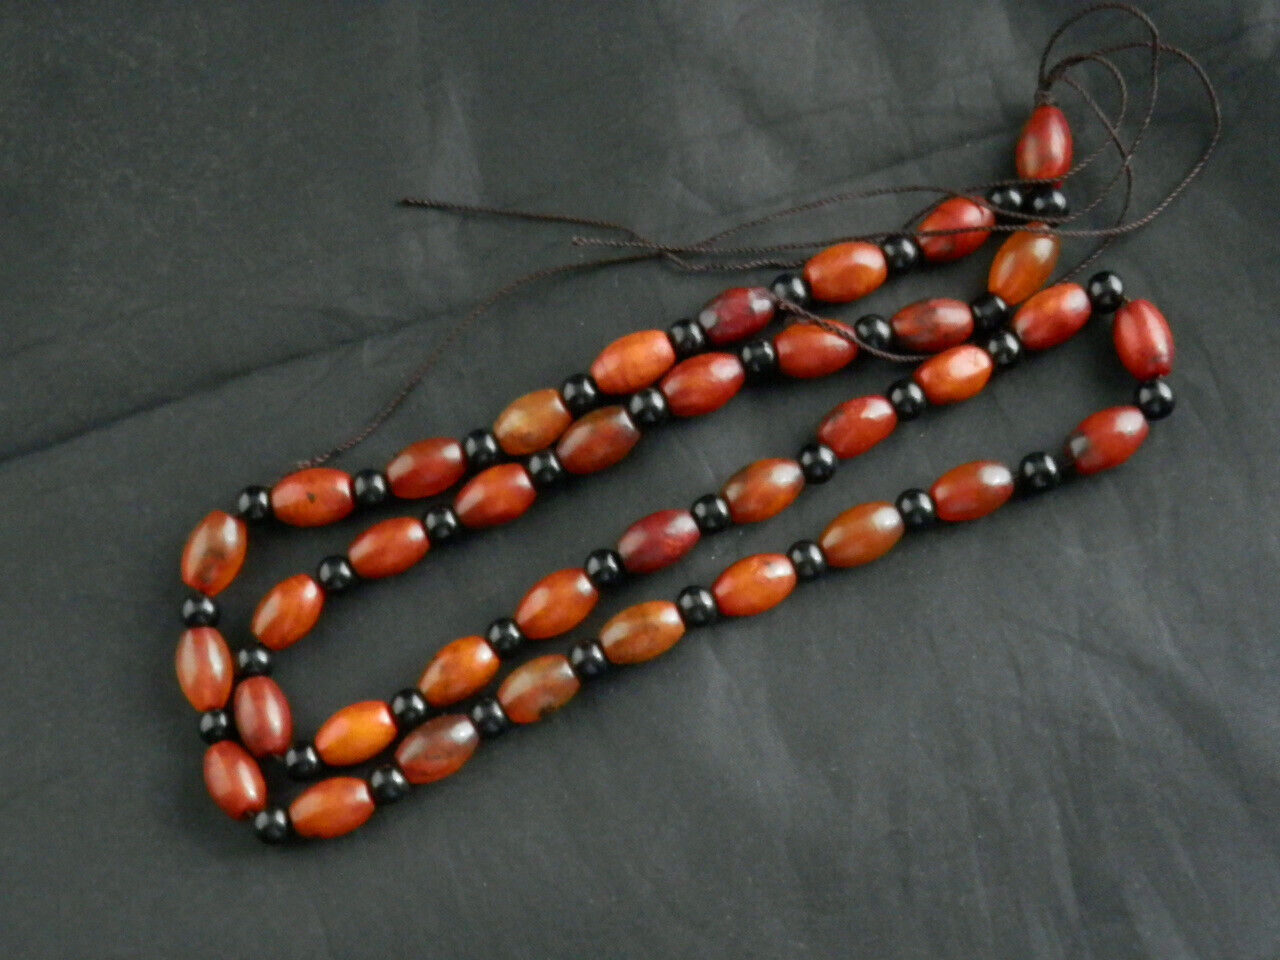 5 Pcs Chinese Old Jade Beads Prayer Necklaces